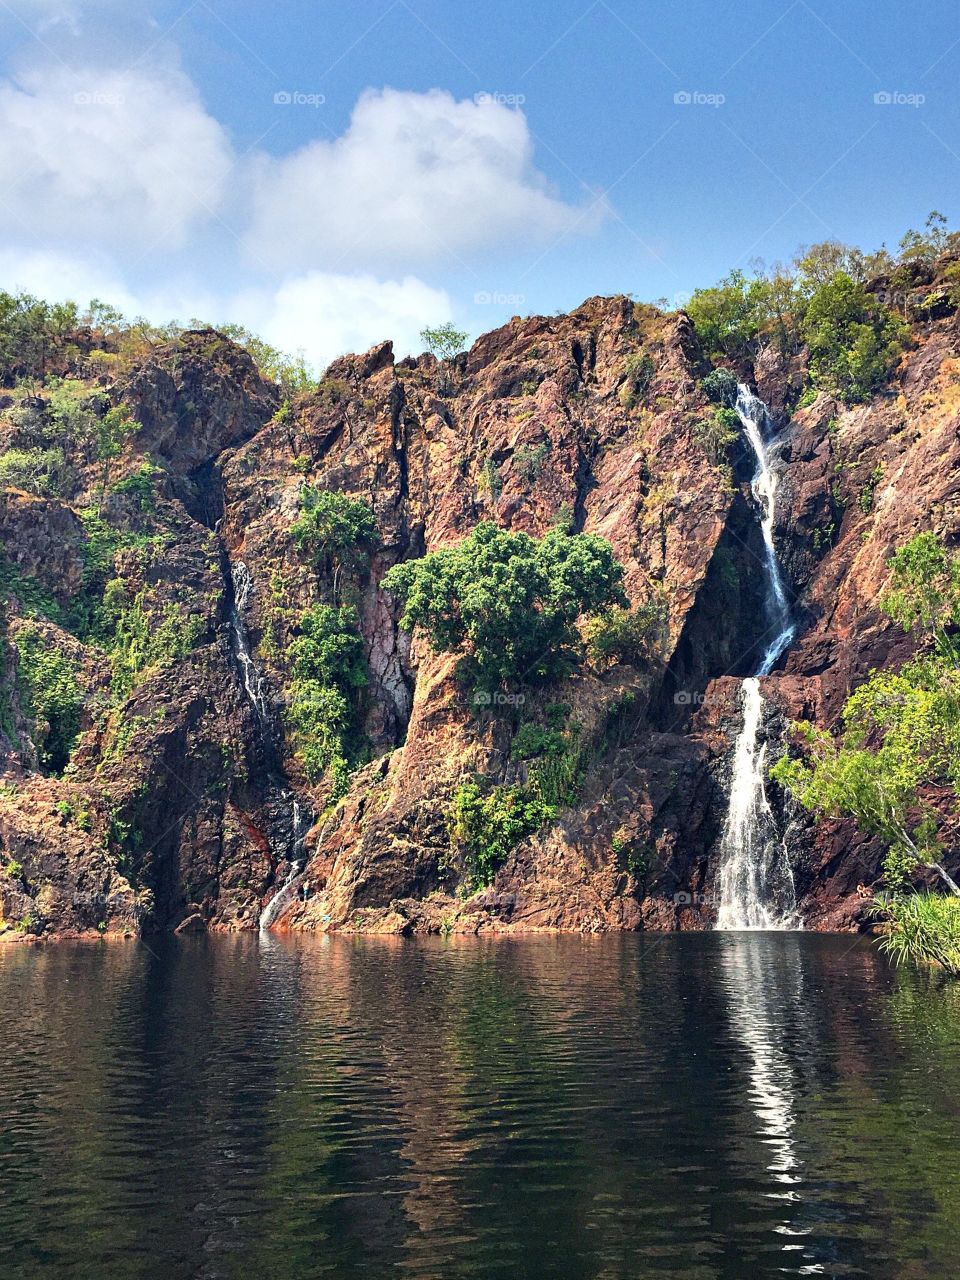 Capture of Wangi Falls at Litchfield Park in the Northern Territory, Australia